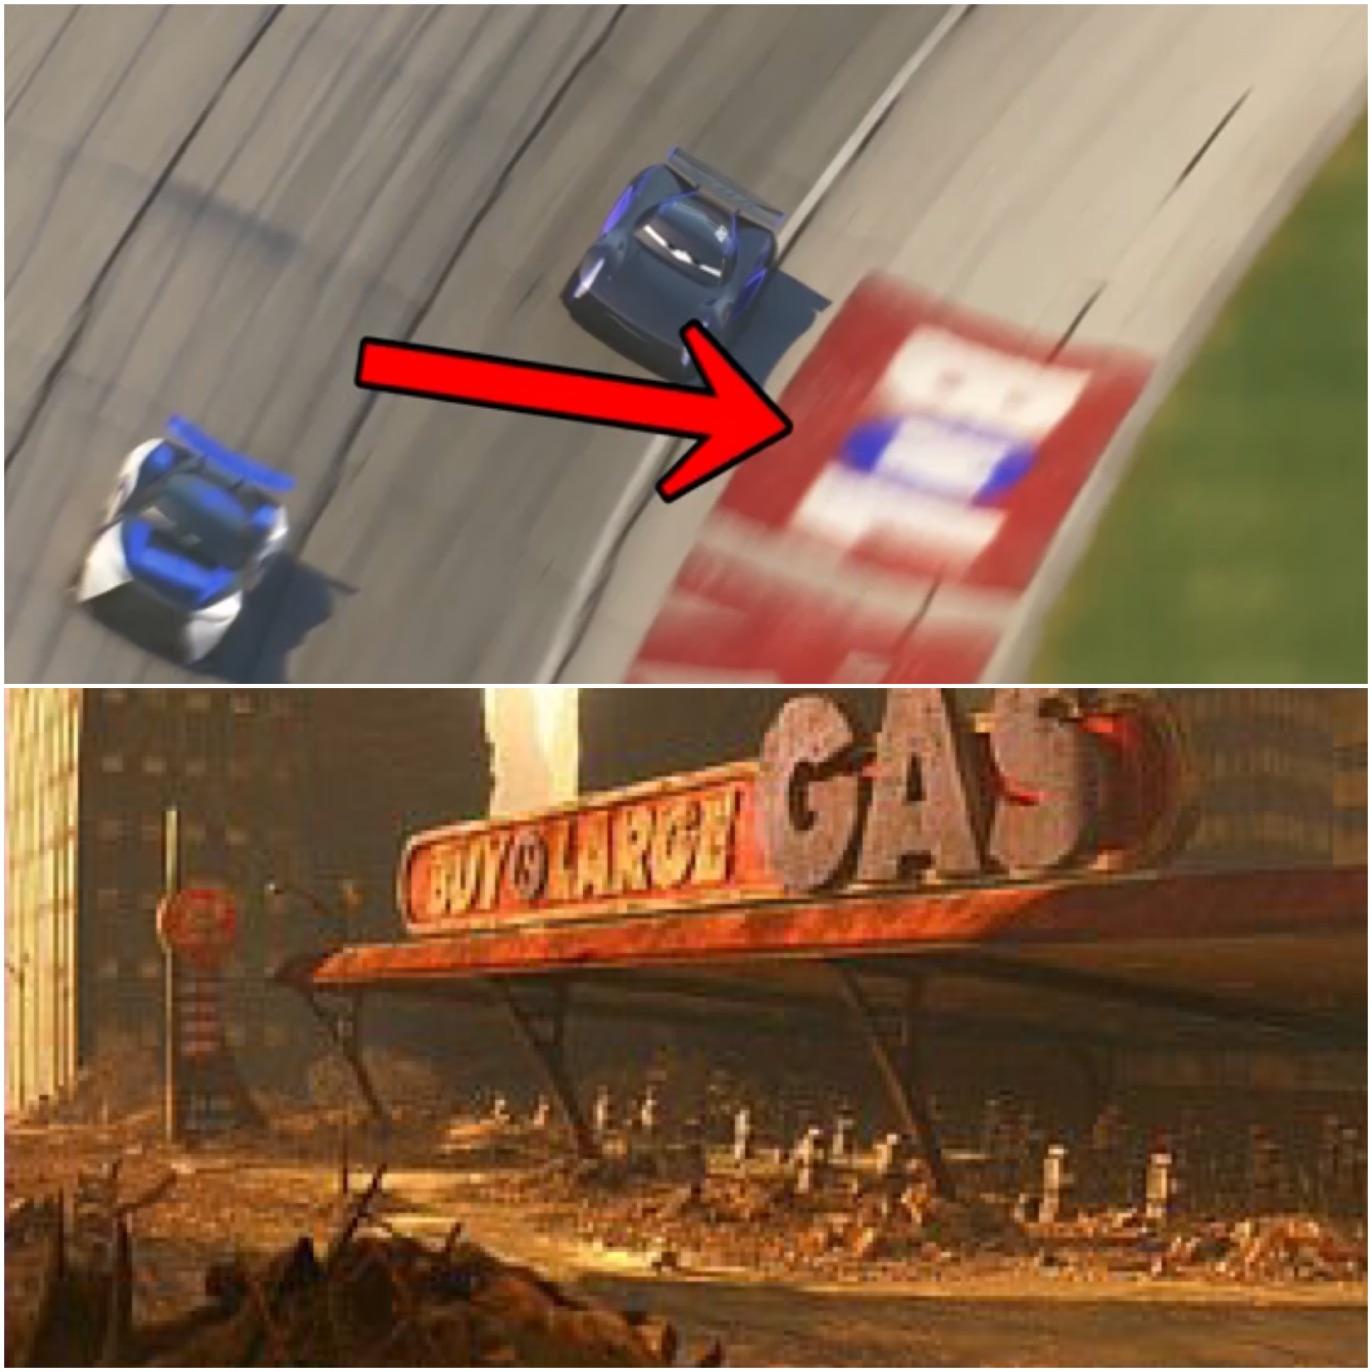 Large Wall E Logo - One of the advertisements for the racetrack in Cars 3 is Buy N Large